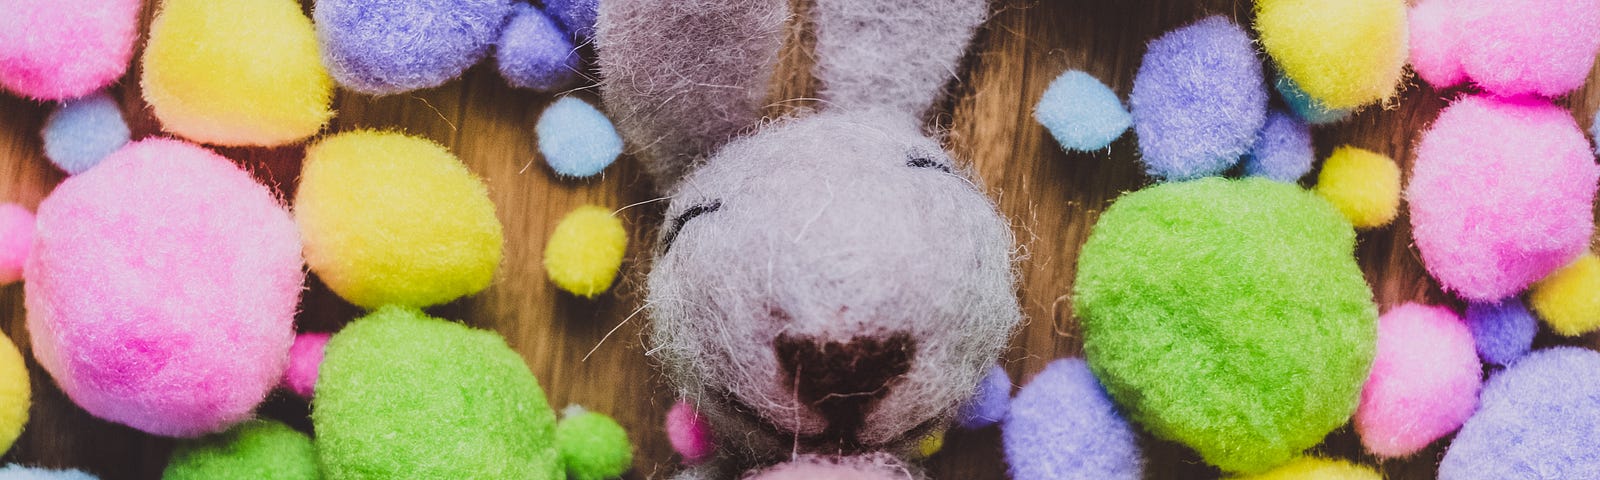 Stuffed Easter Bunny surrounded by pooped chocolates